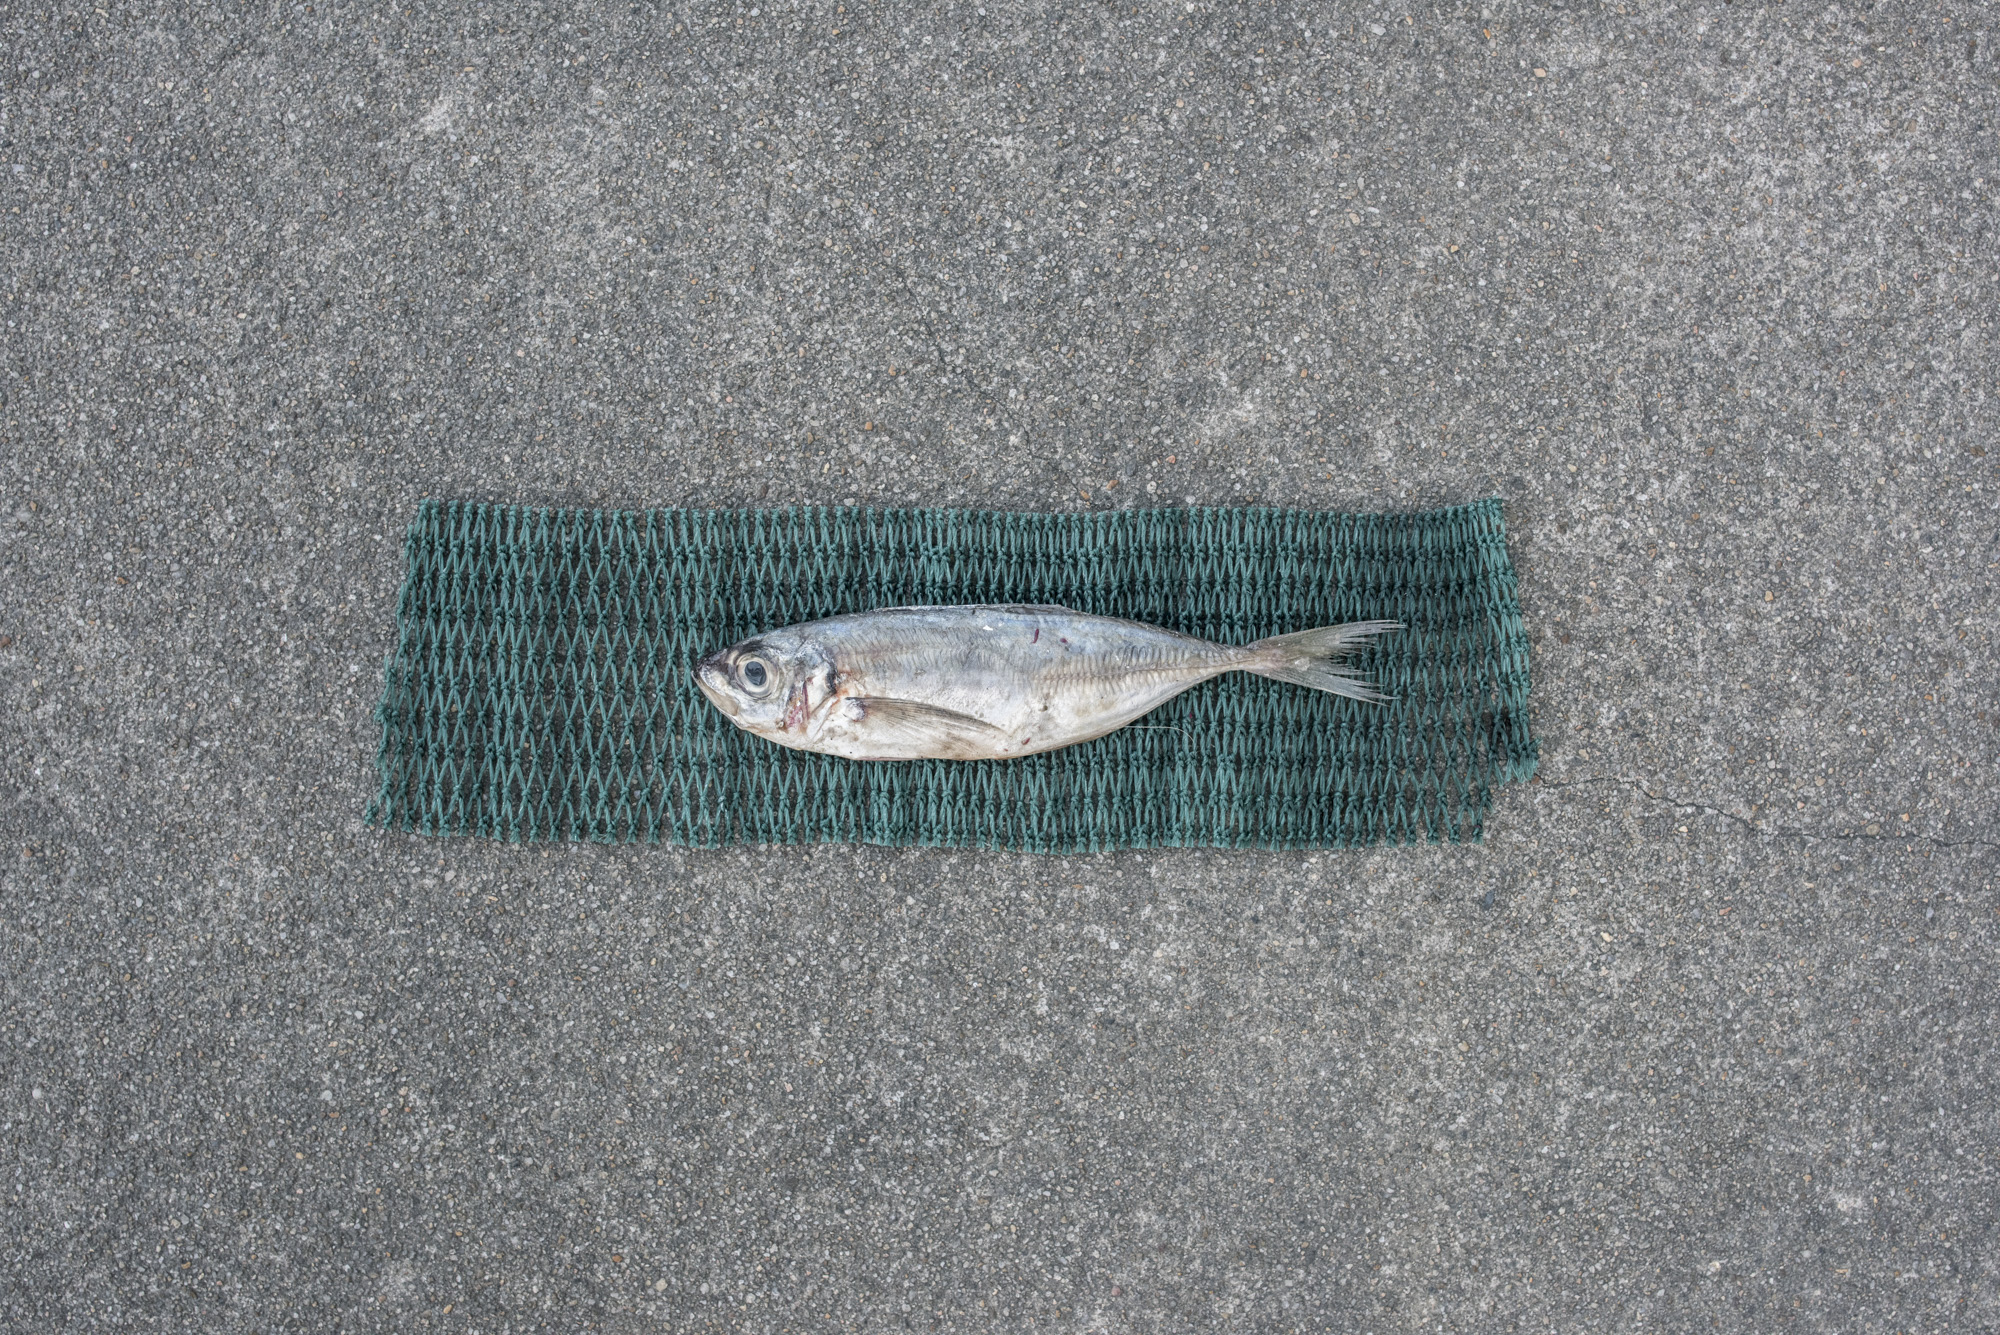  Size of juvenile Japanese scad caught for fish feed(11.4cm) versus size of average adult Japanese scad (15.8cm, as represented by green net below fish) 